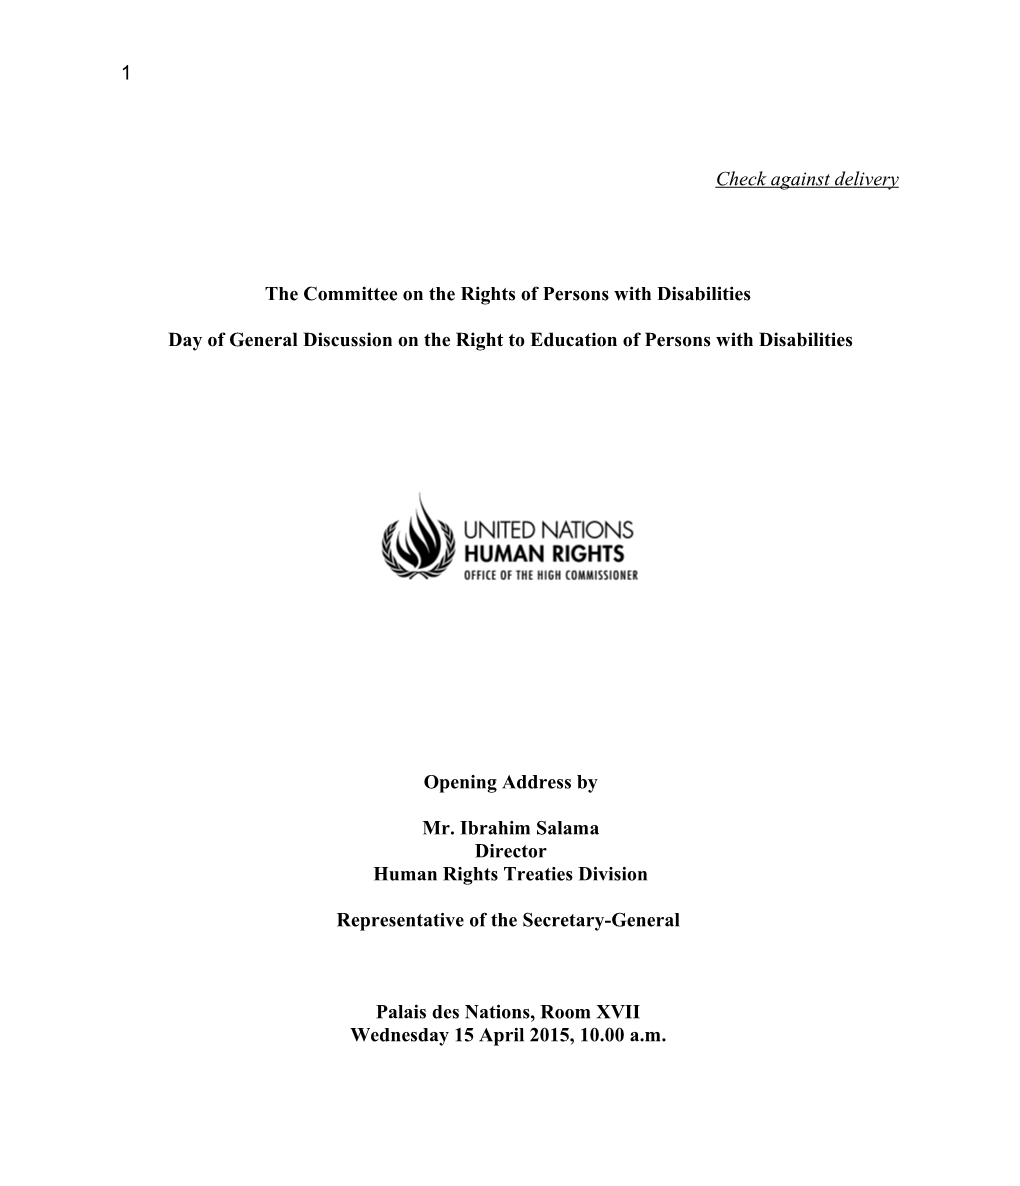 The Committee on the Rights of Persons with Disabilities